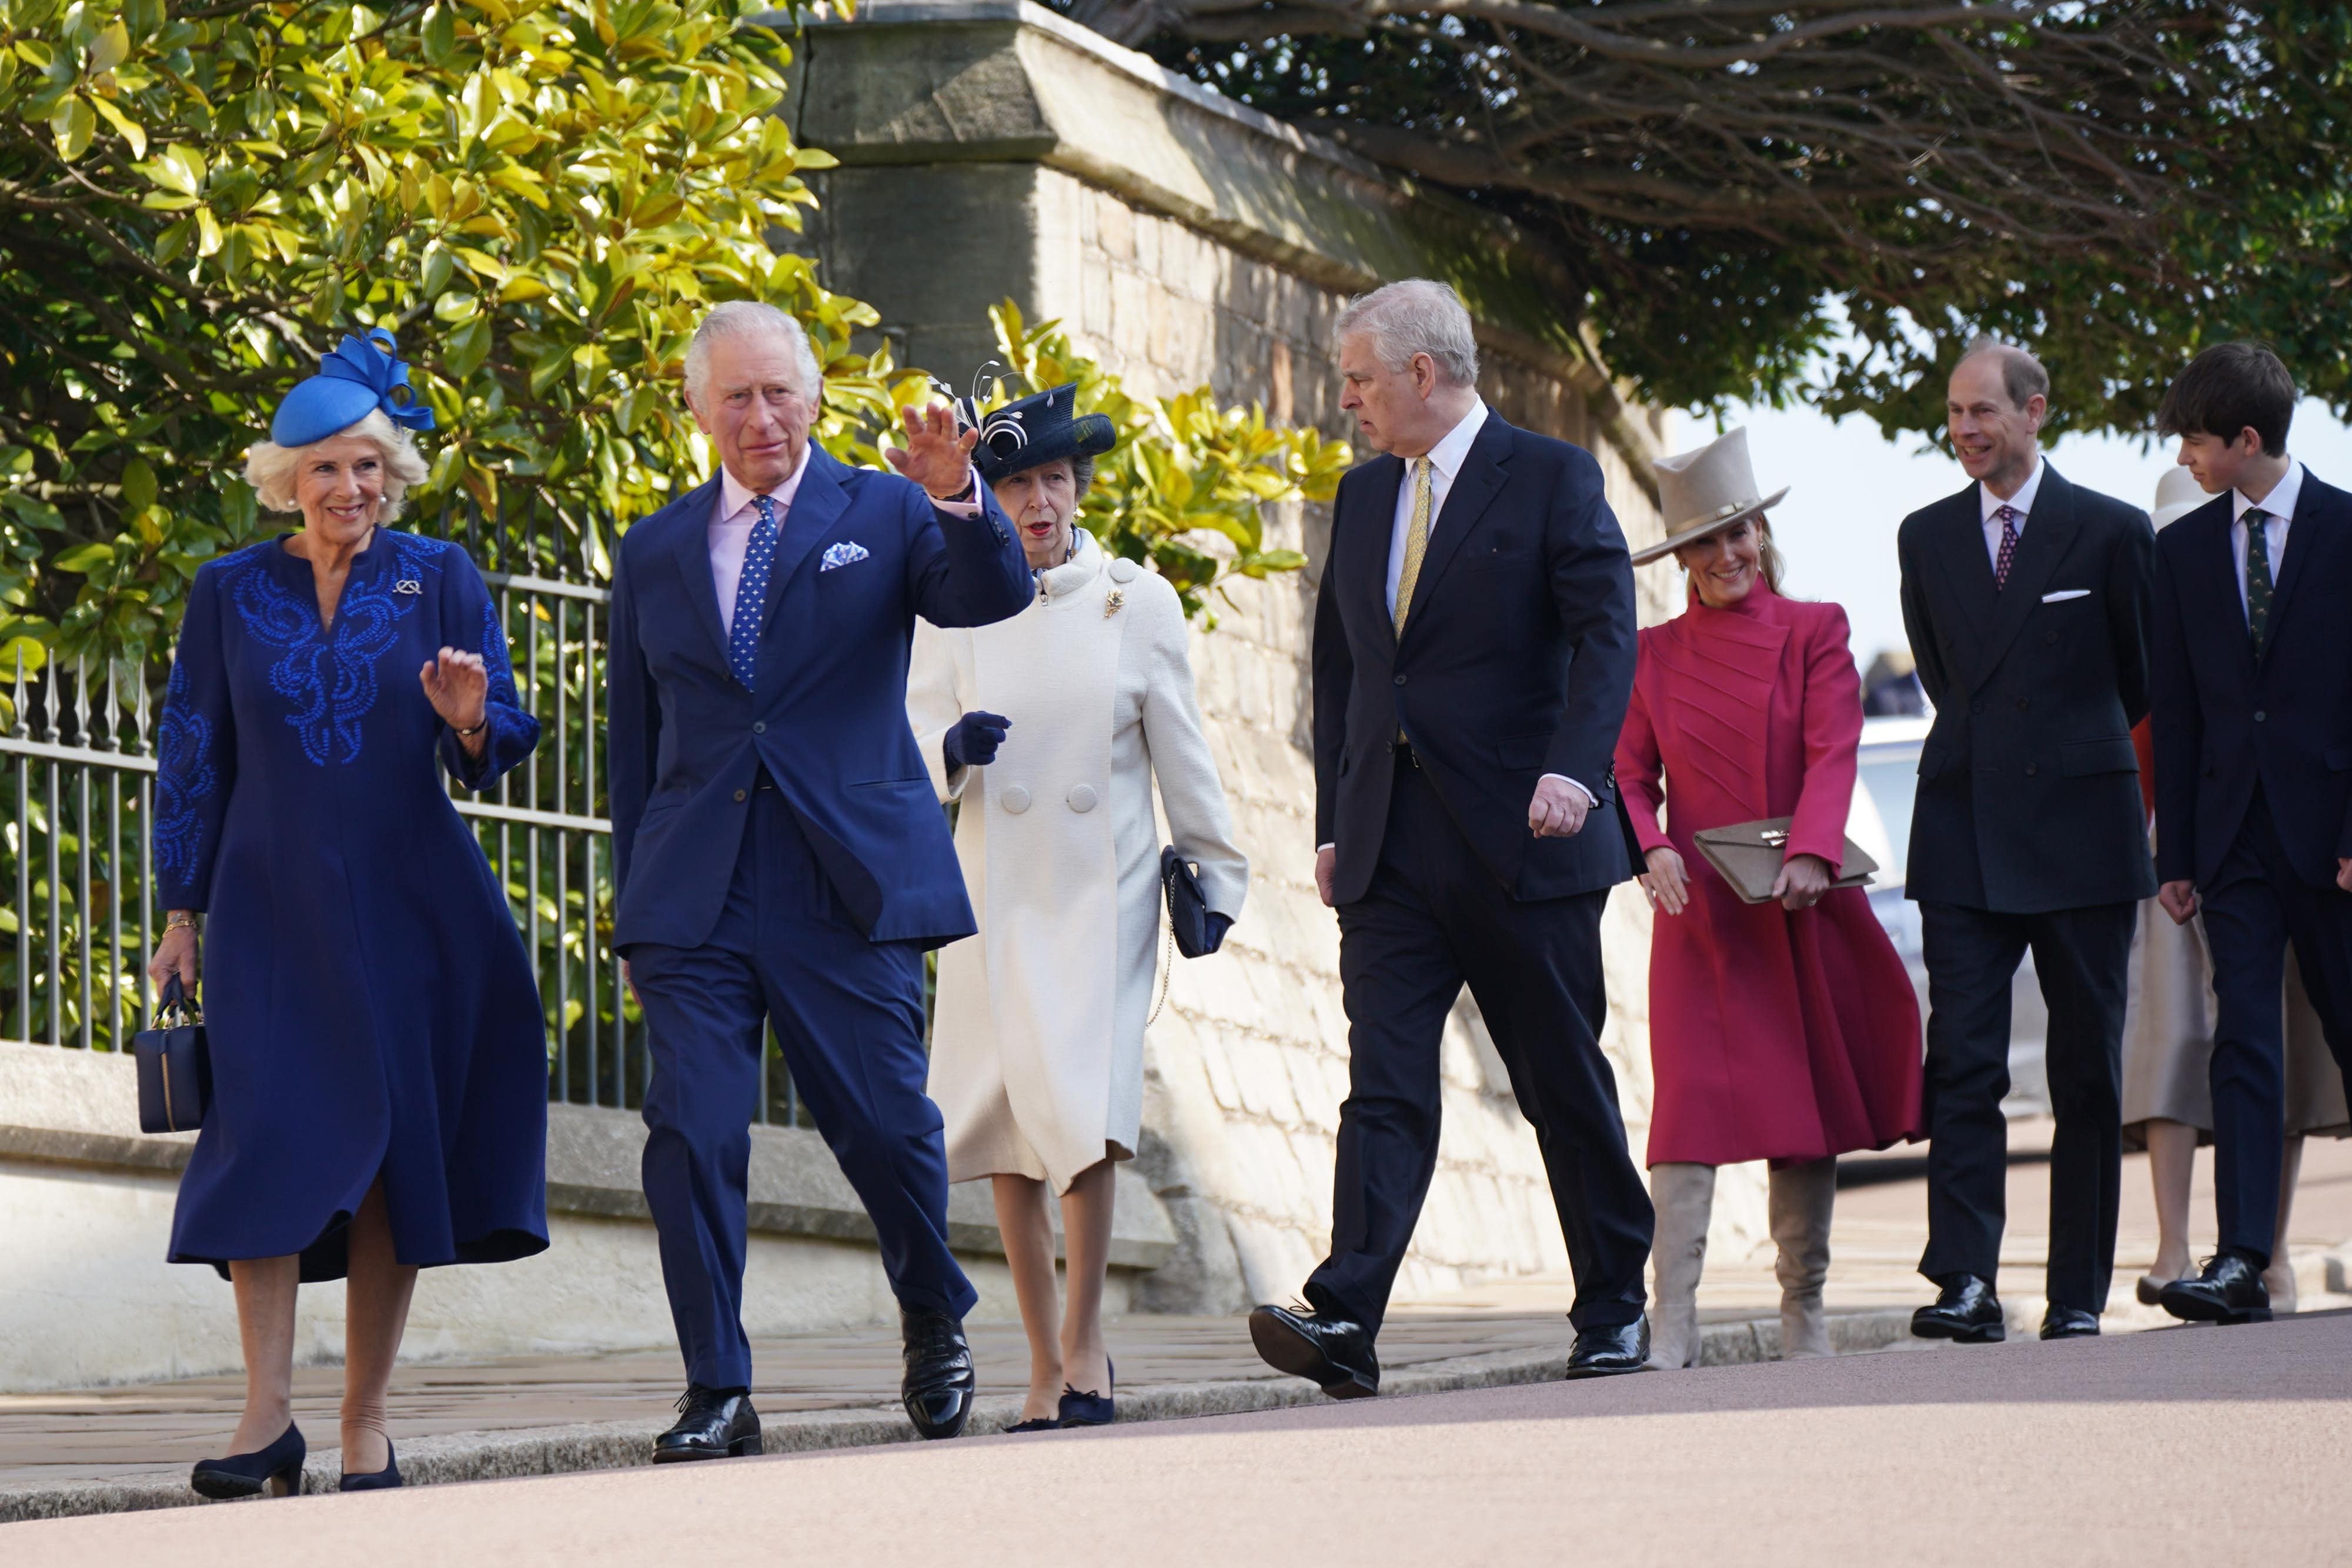 Charles and Camilla wish crowds ‘Happy Easter’ after church service at